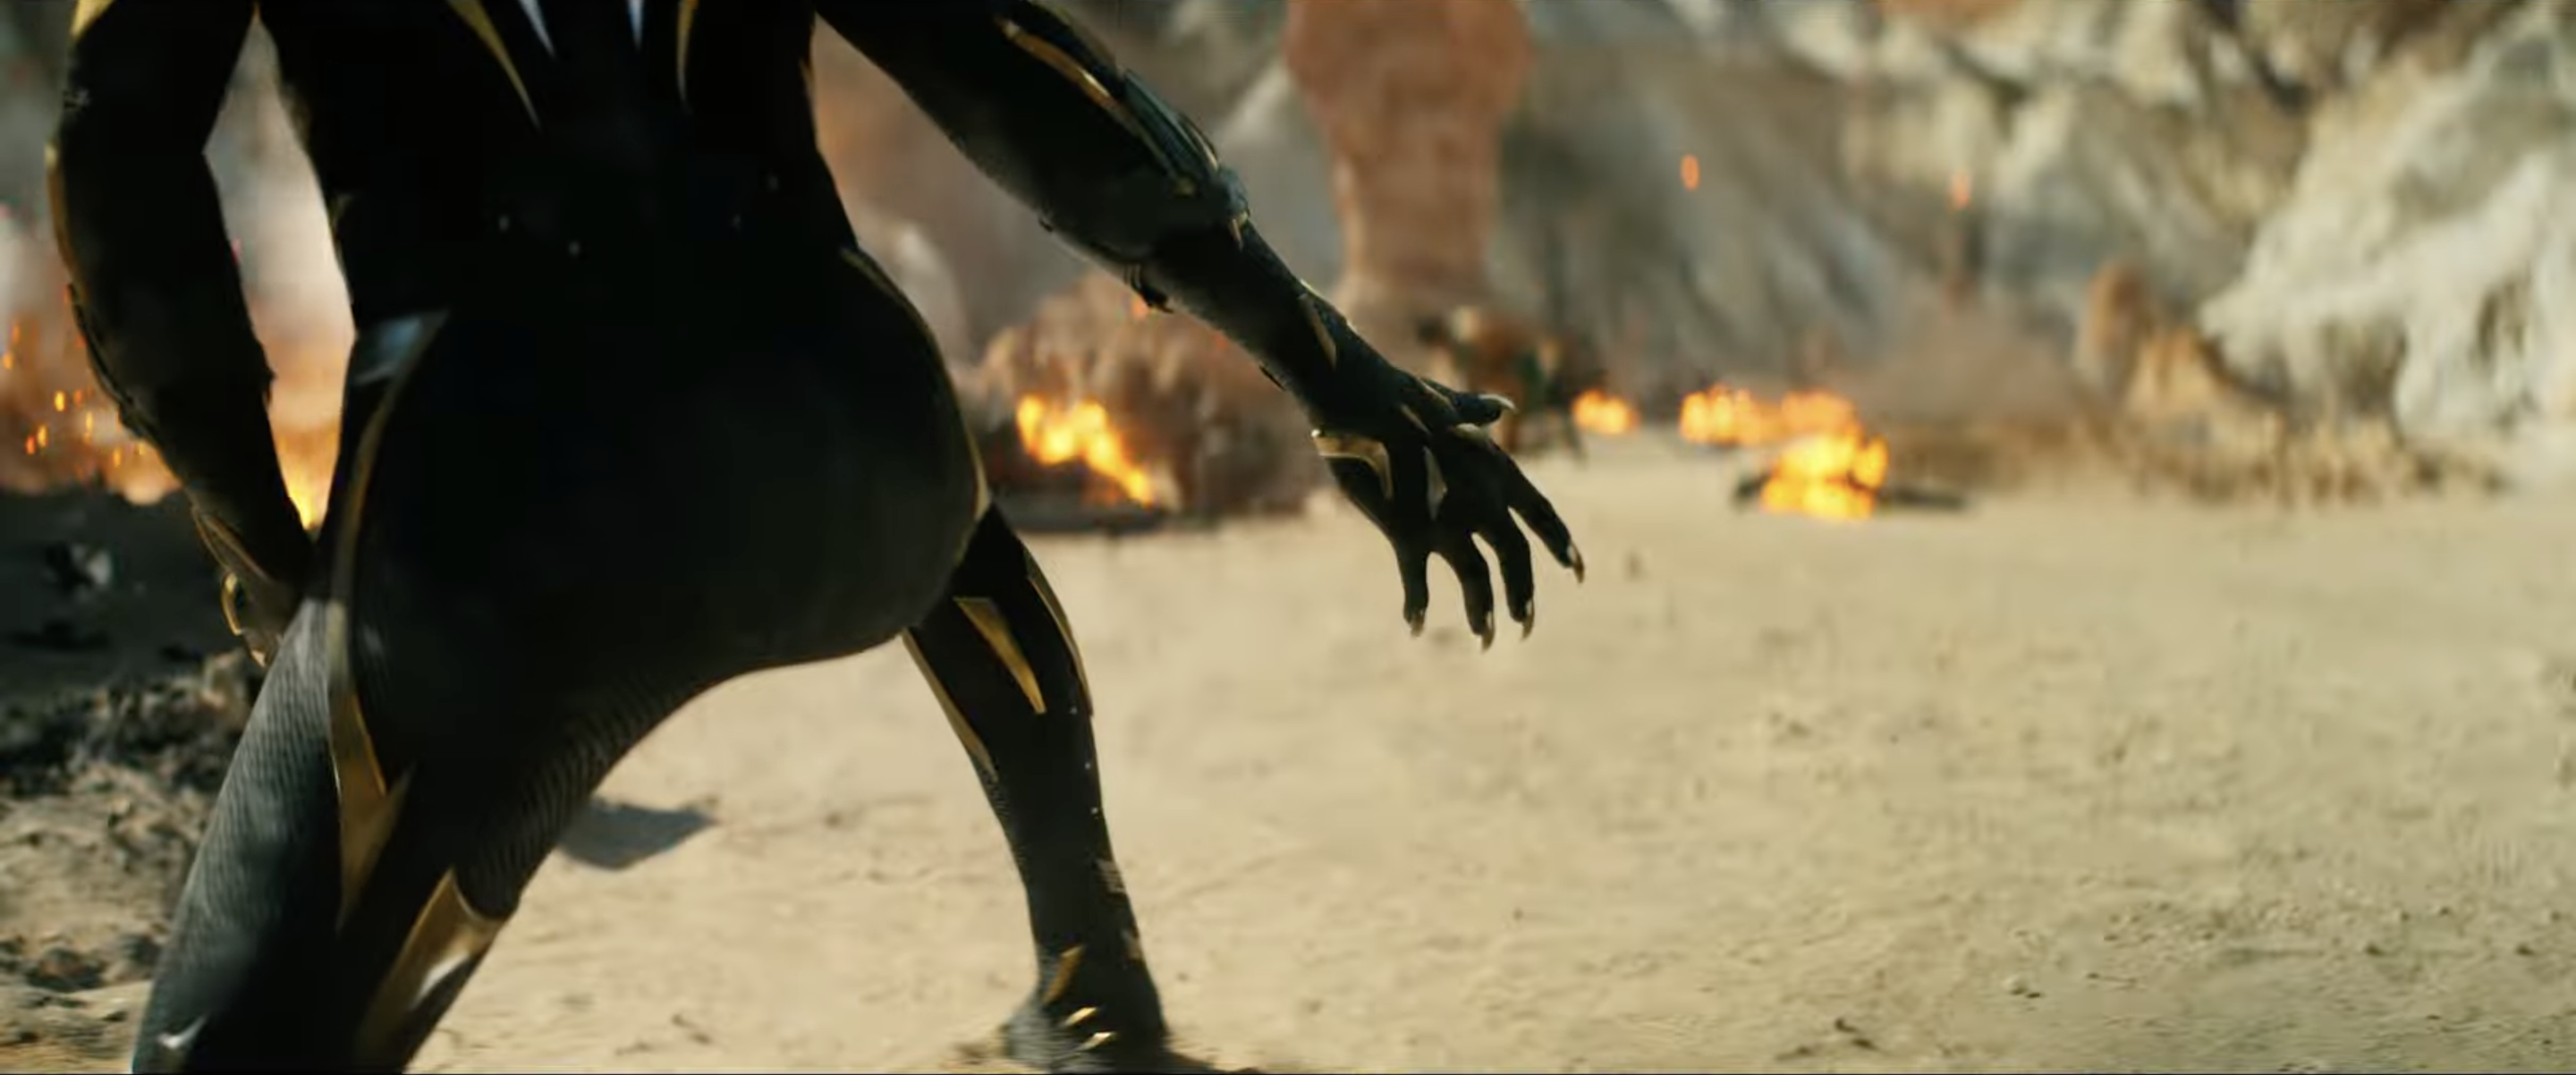 Black Panther crouching in front of an explosion and flexing claws, shot from below, with the head cut off in the image